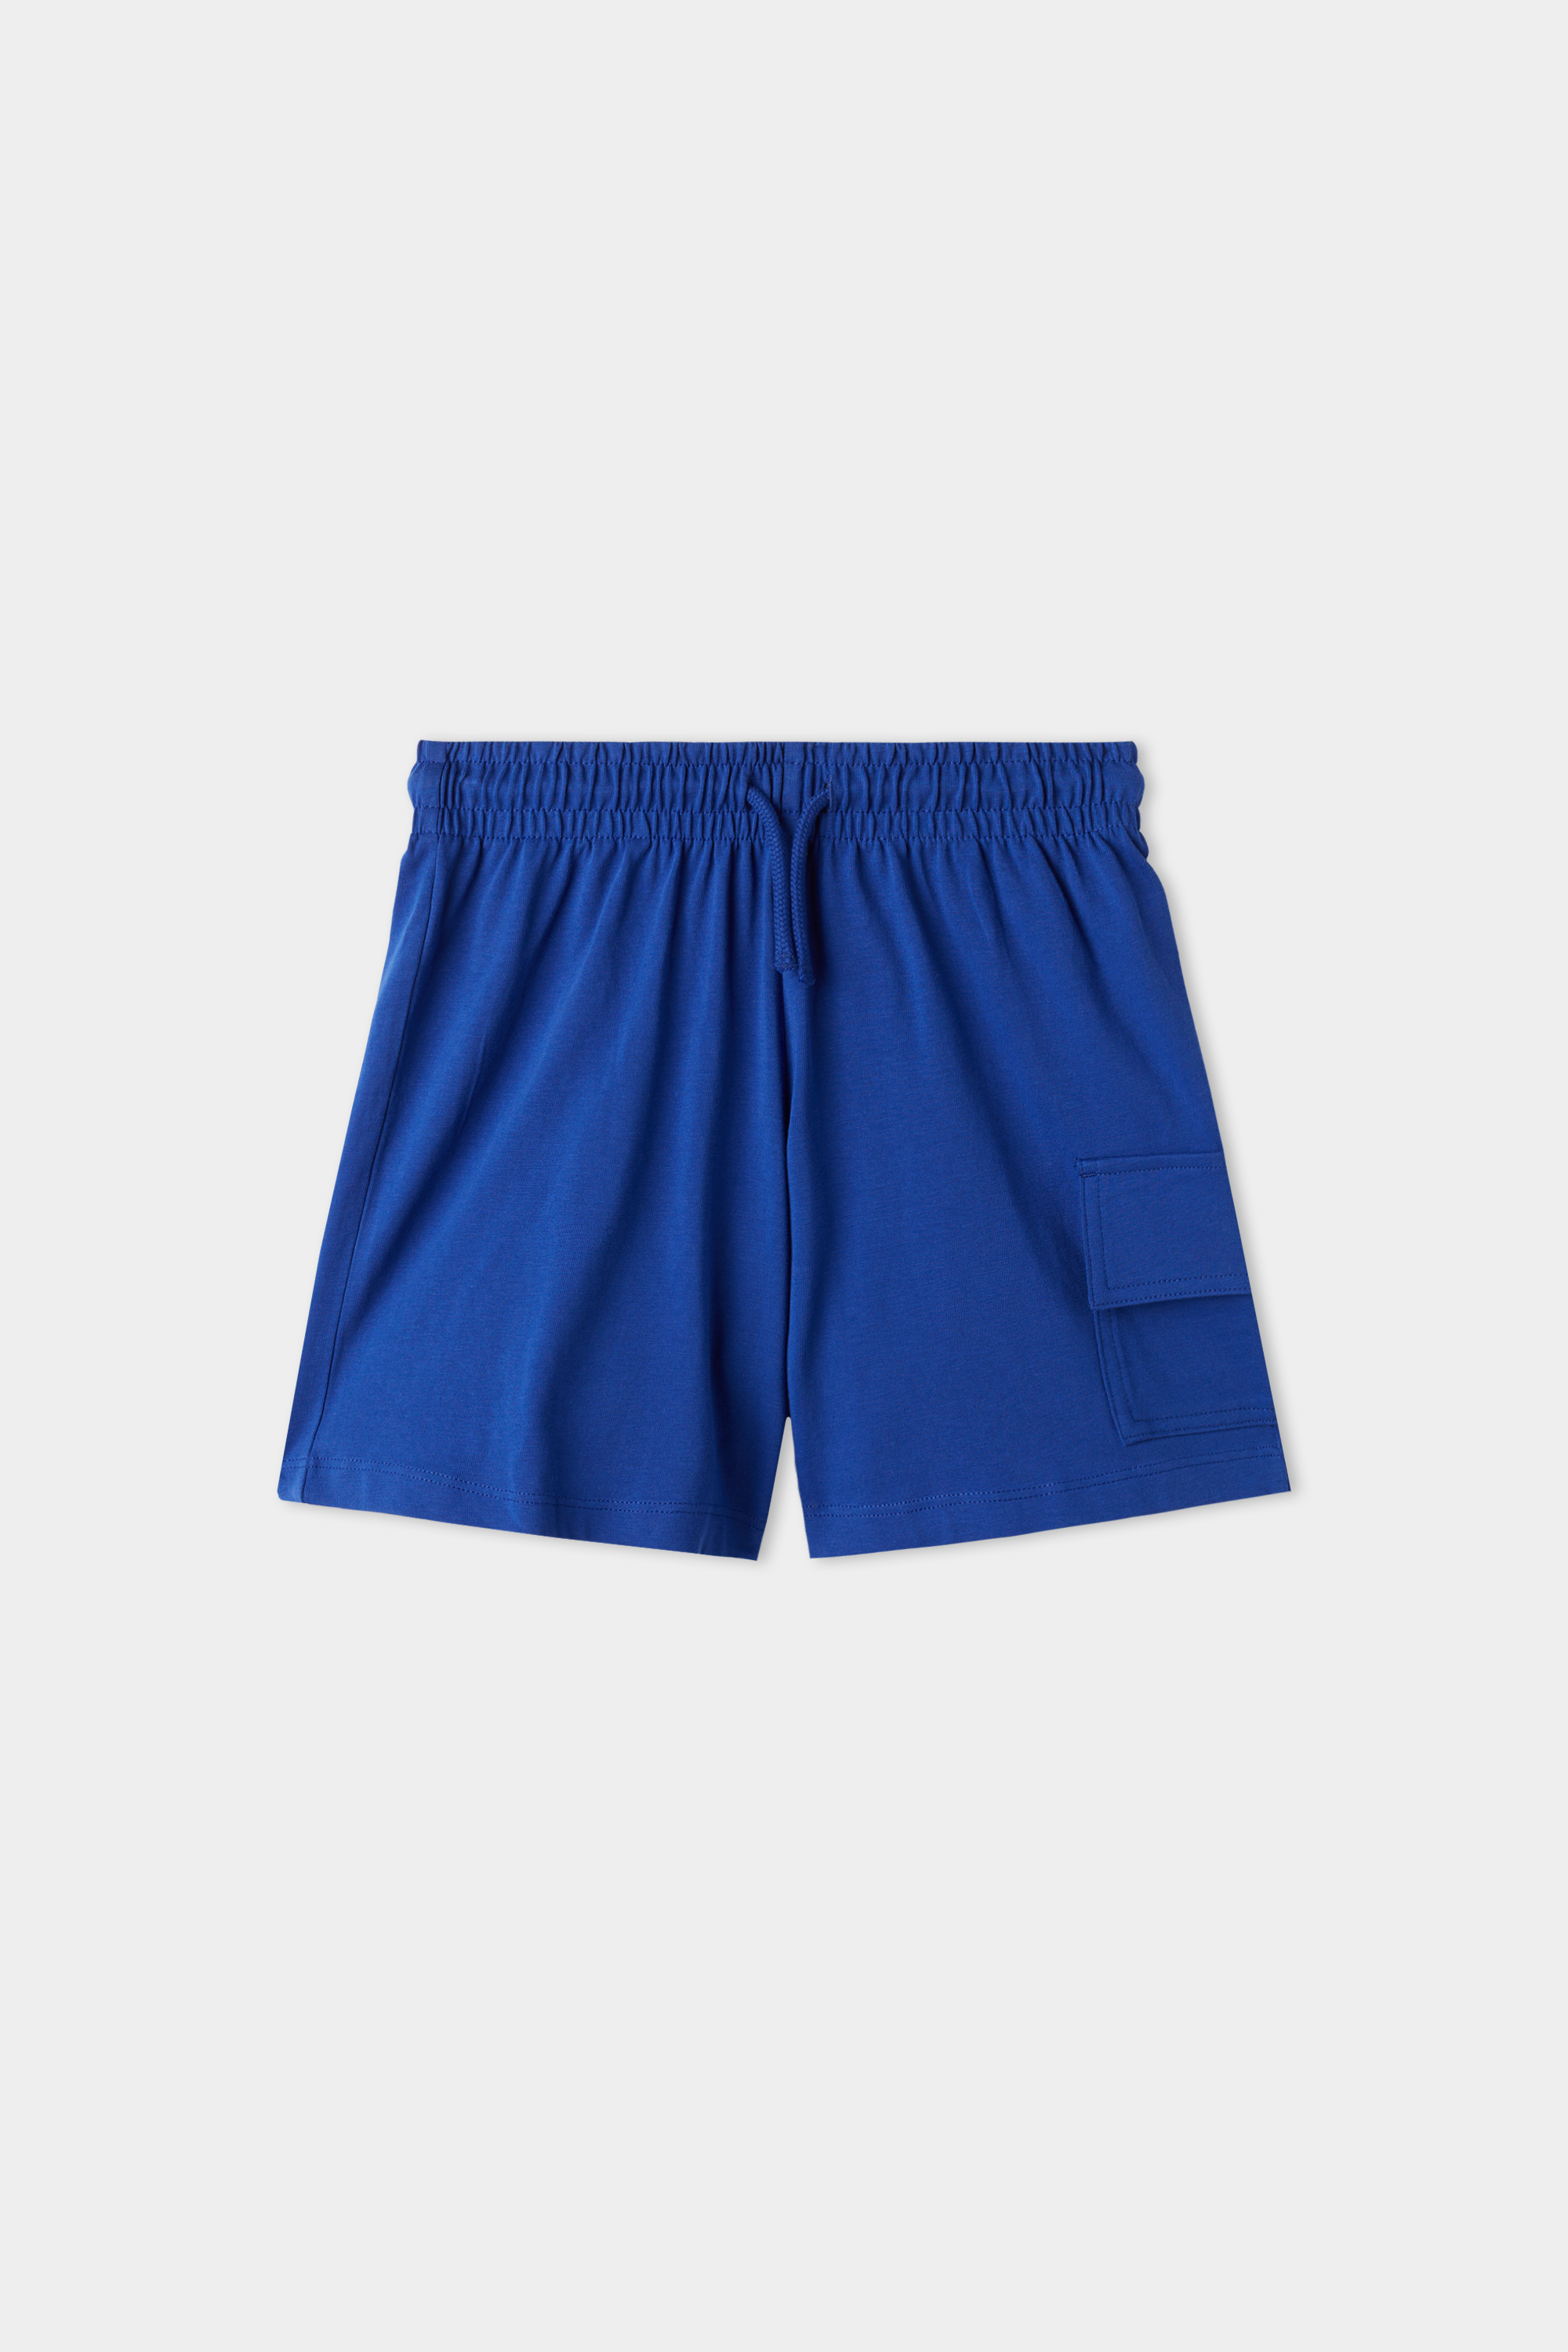 Boys’ Cotton Shorts with Pocket